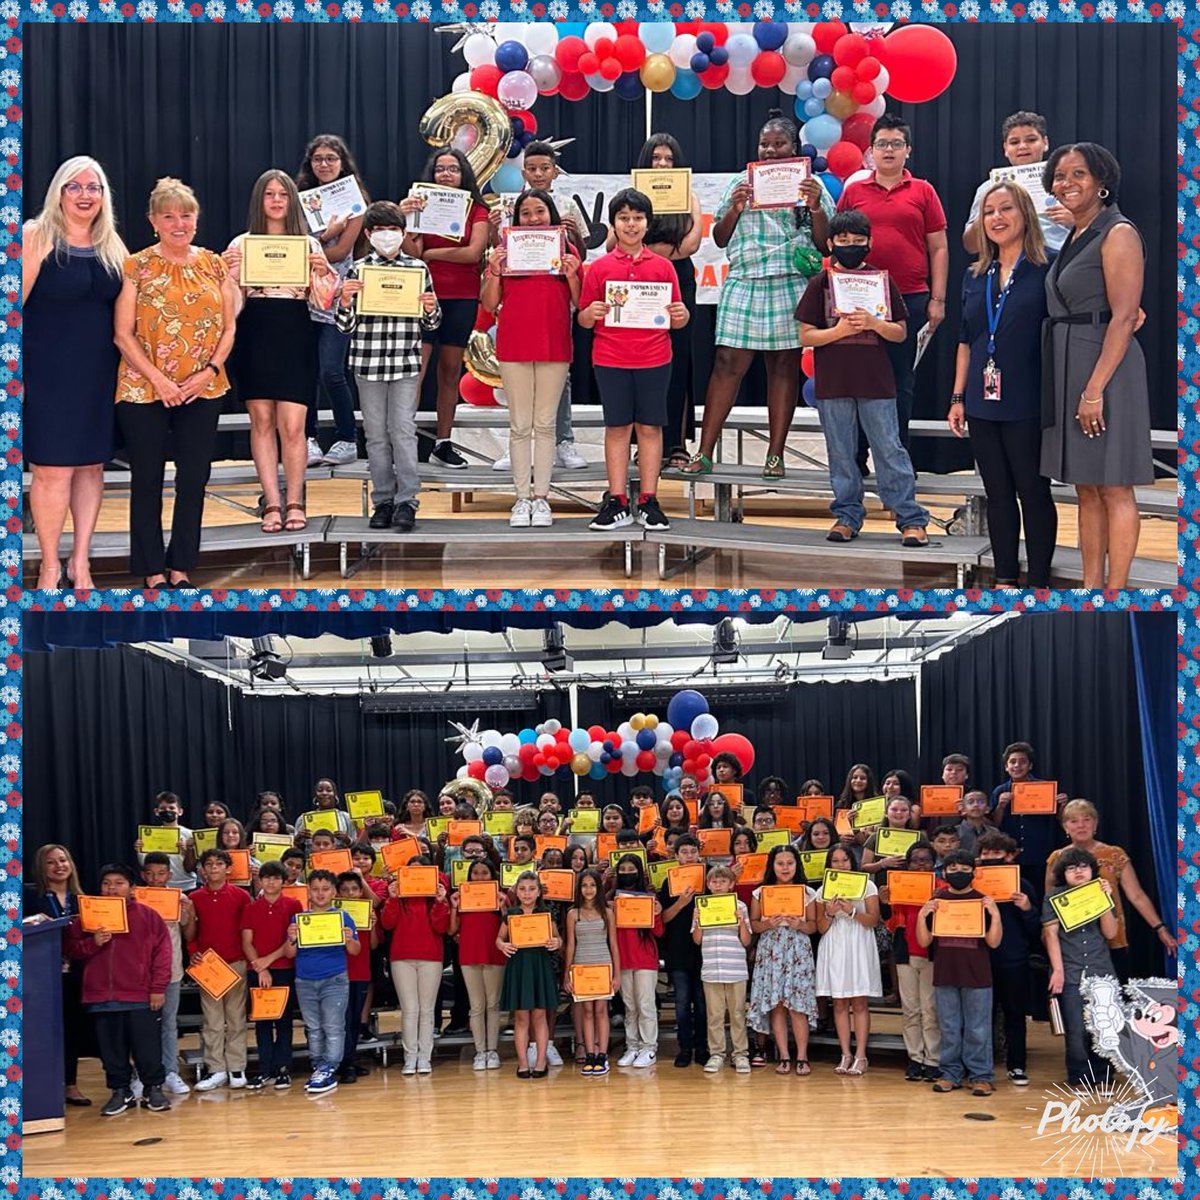 It’s a wrap for our fifth grade students celebrating and ready for middle school! #peskoek-8 #bearnation🐻 #peskoepride❤️ #Aschool #wherethemagichappens✨ @mdcpssouth @miamischools